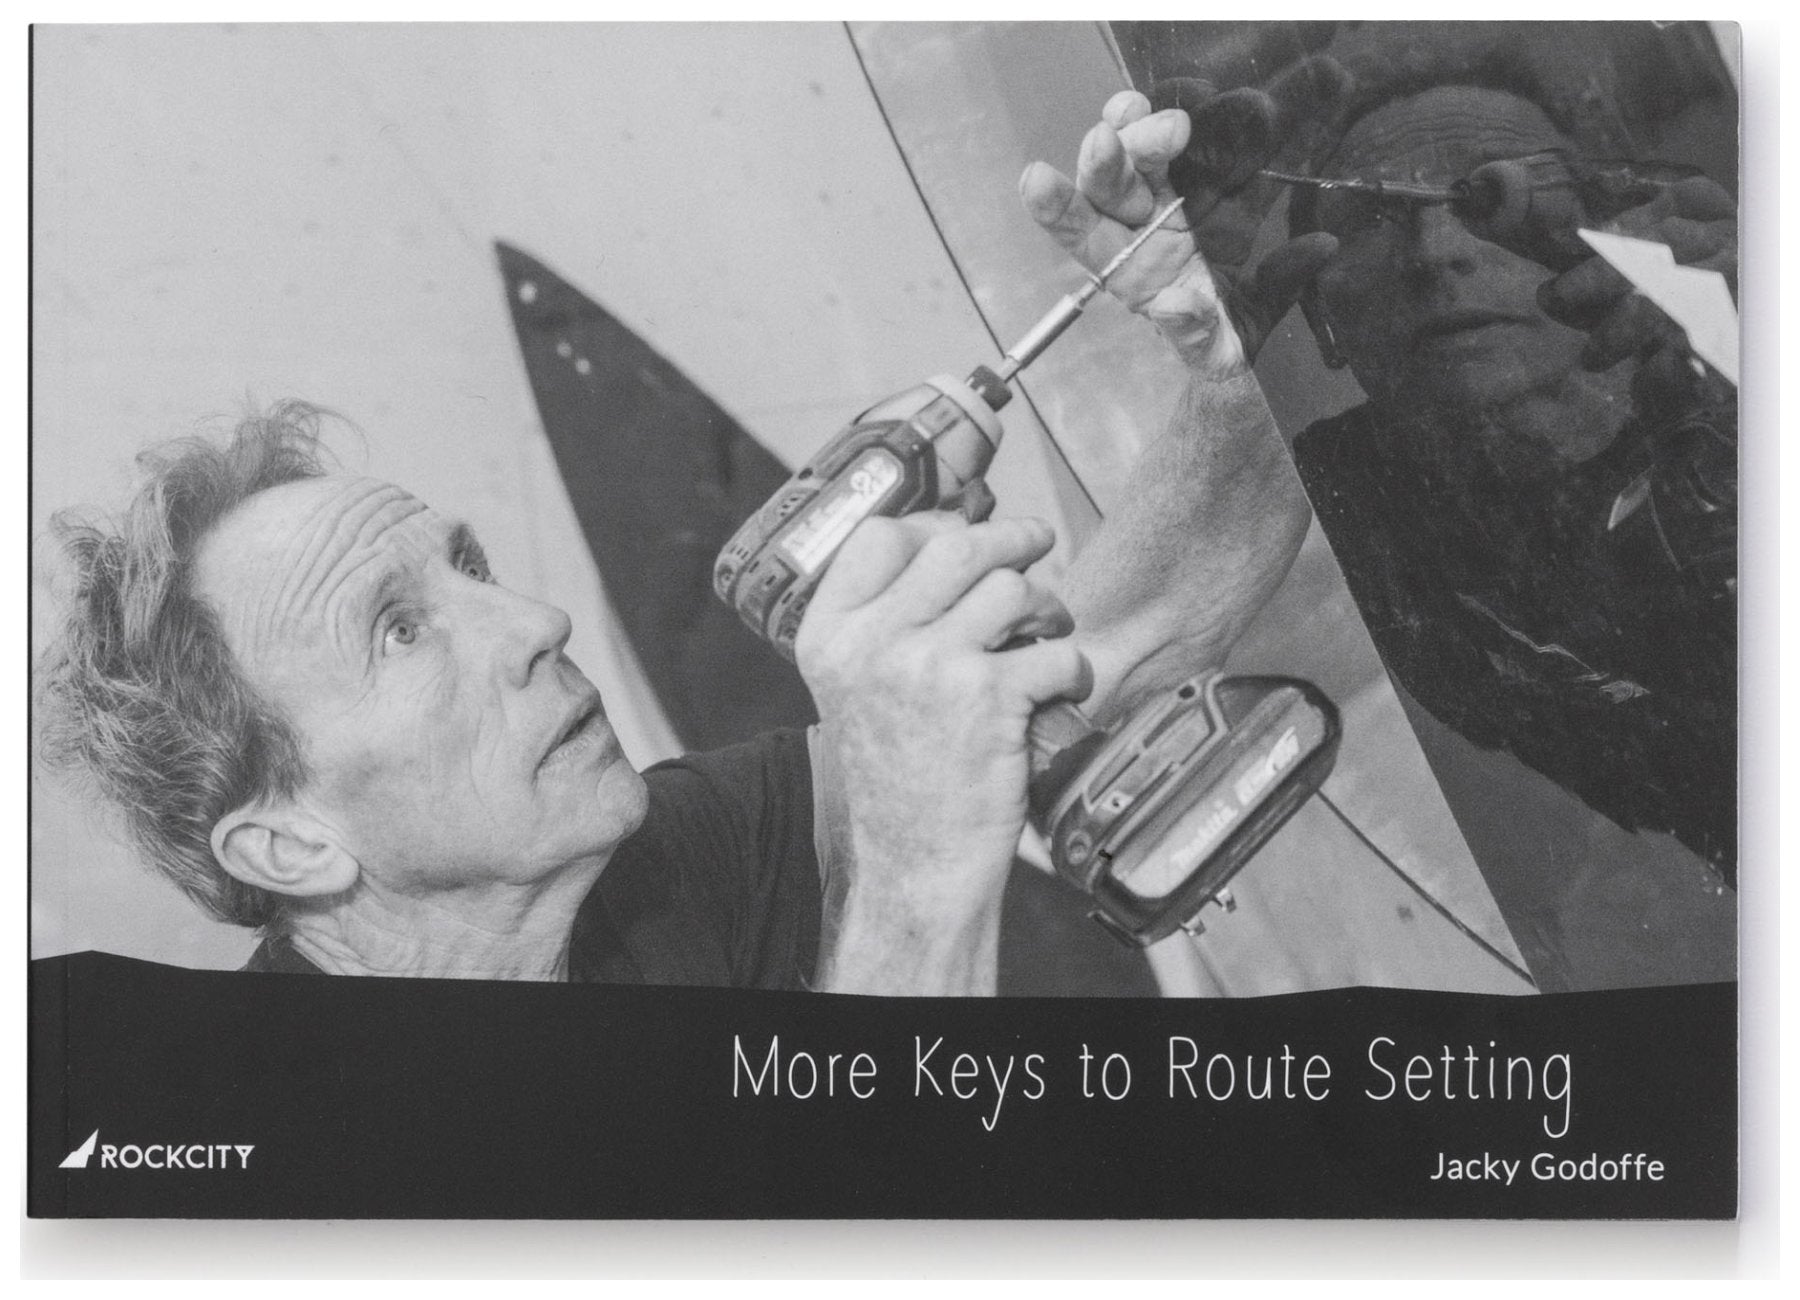 More Keys to Route Setting